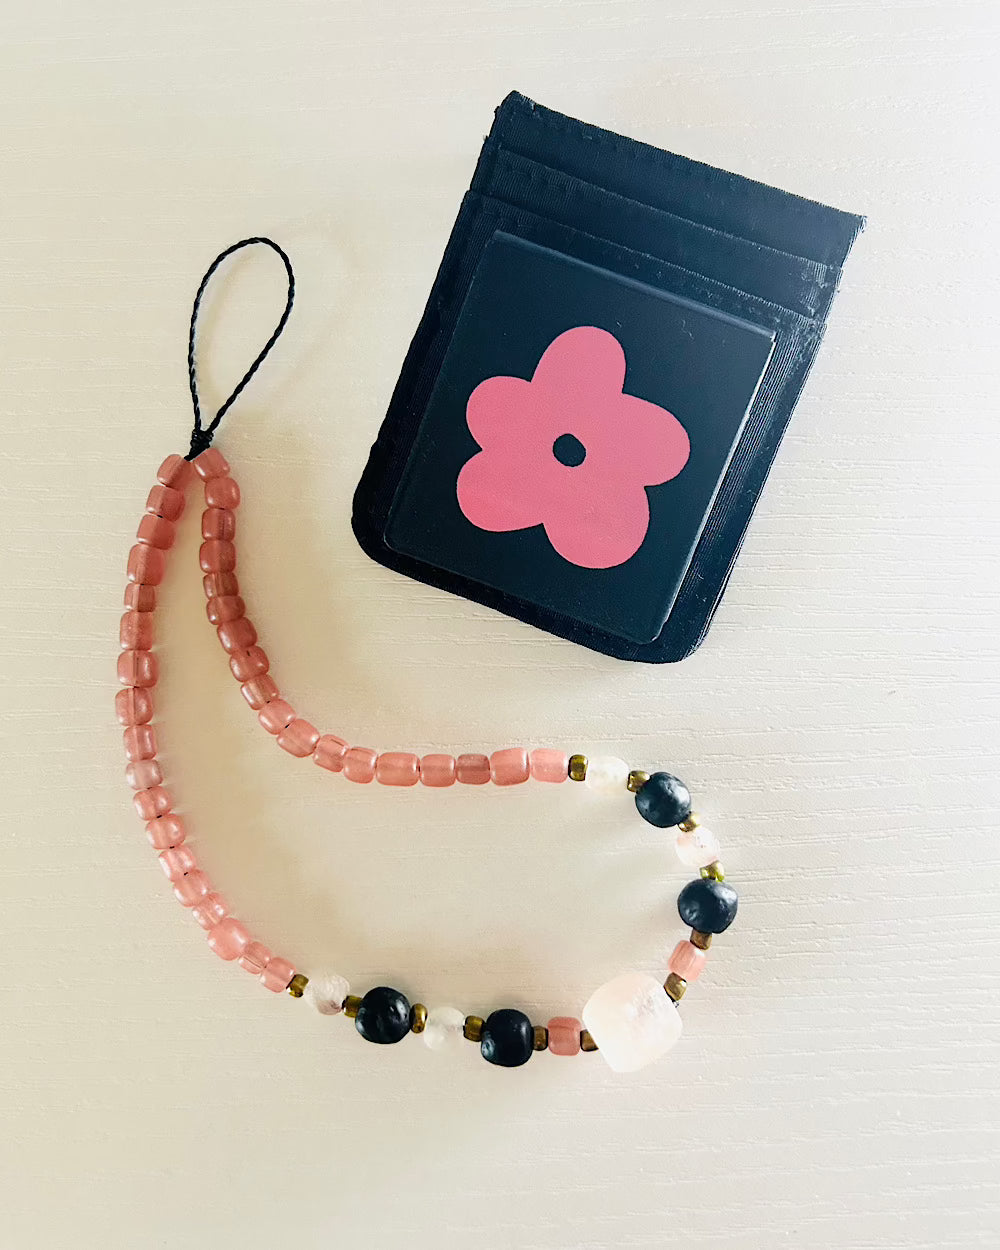 podangle flower power stand-wallet-charm set SPECIAL SAVE 20%